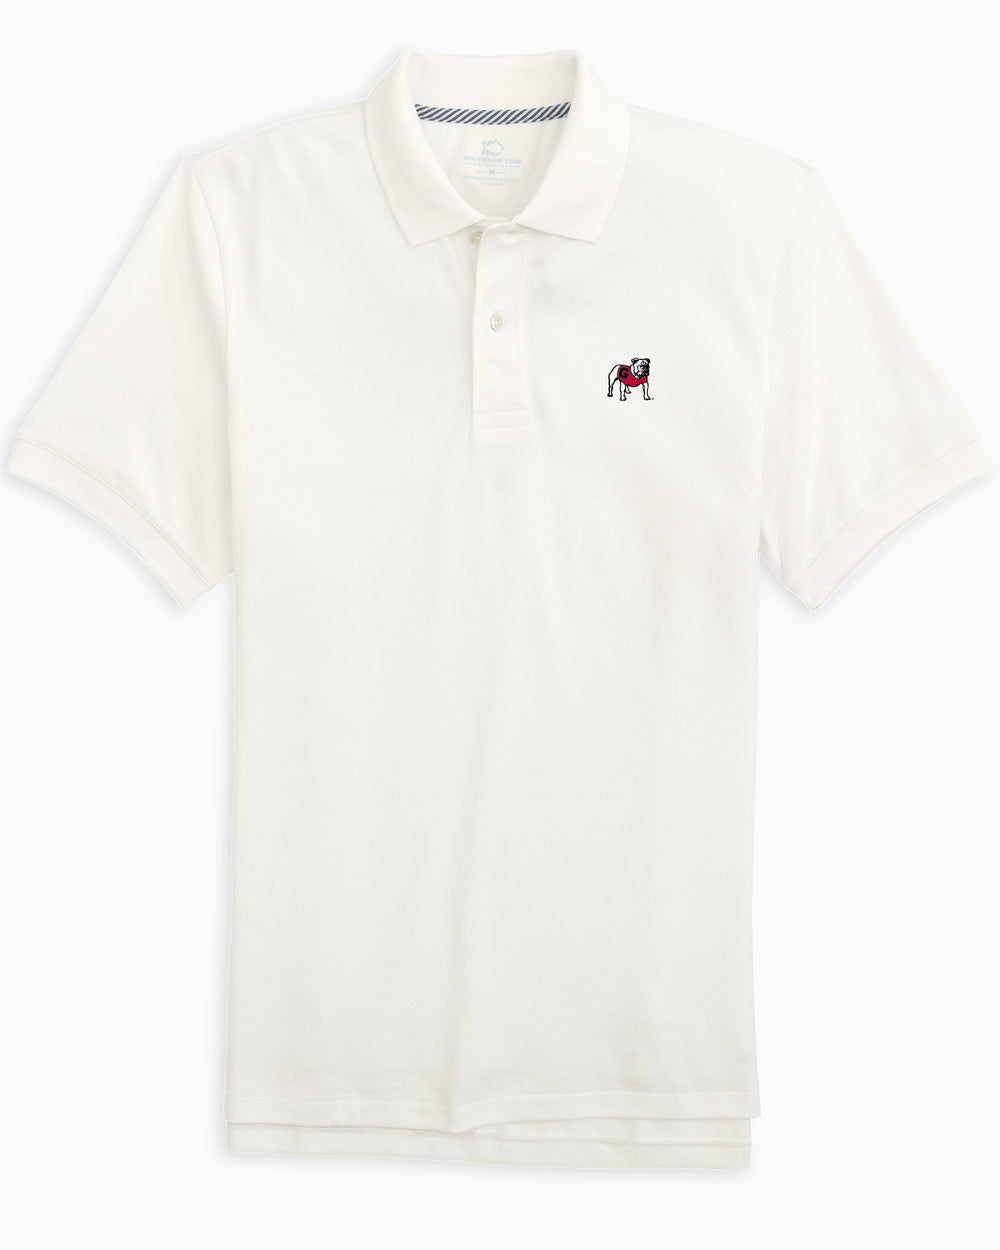 The front view of the Georgia Bulldogs New Short Sleeve Skipjack Polo by Southern Tide - Classic White